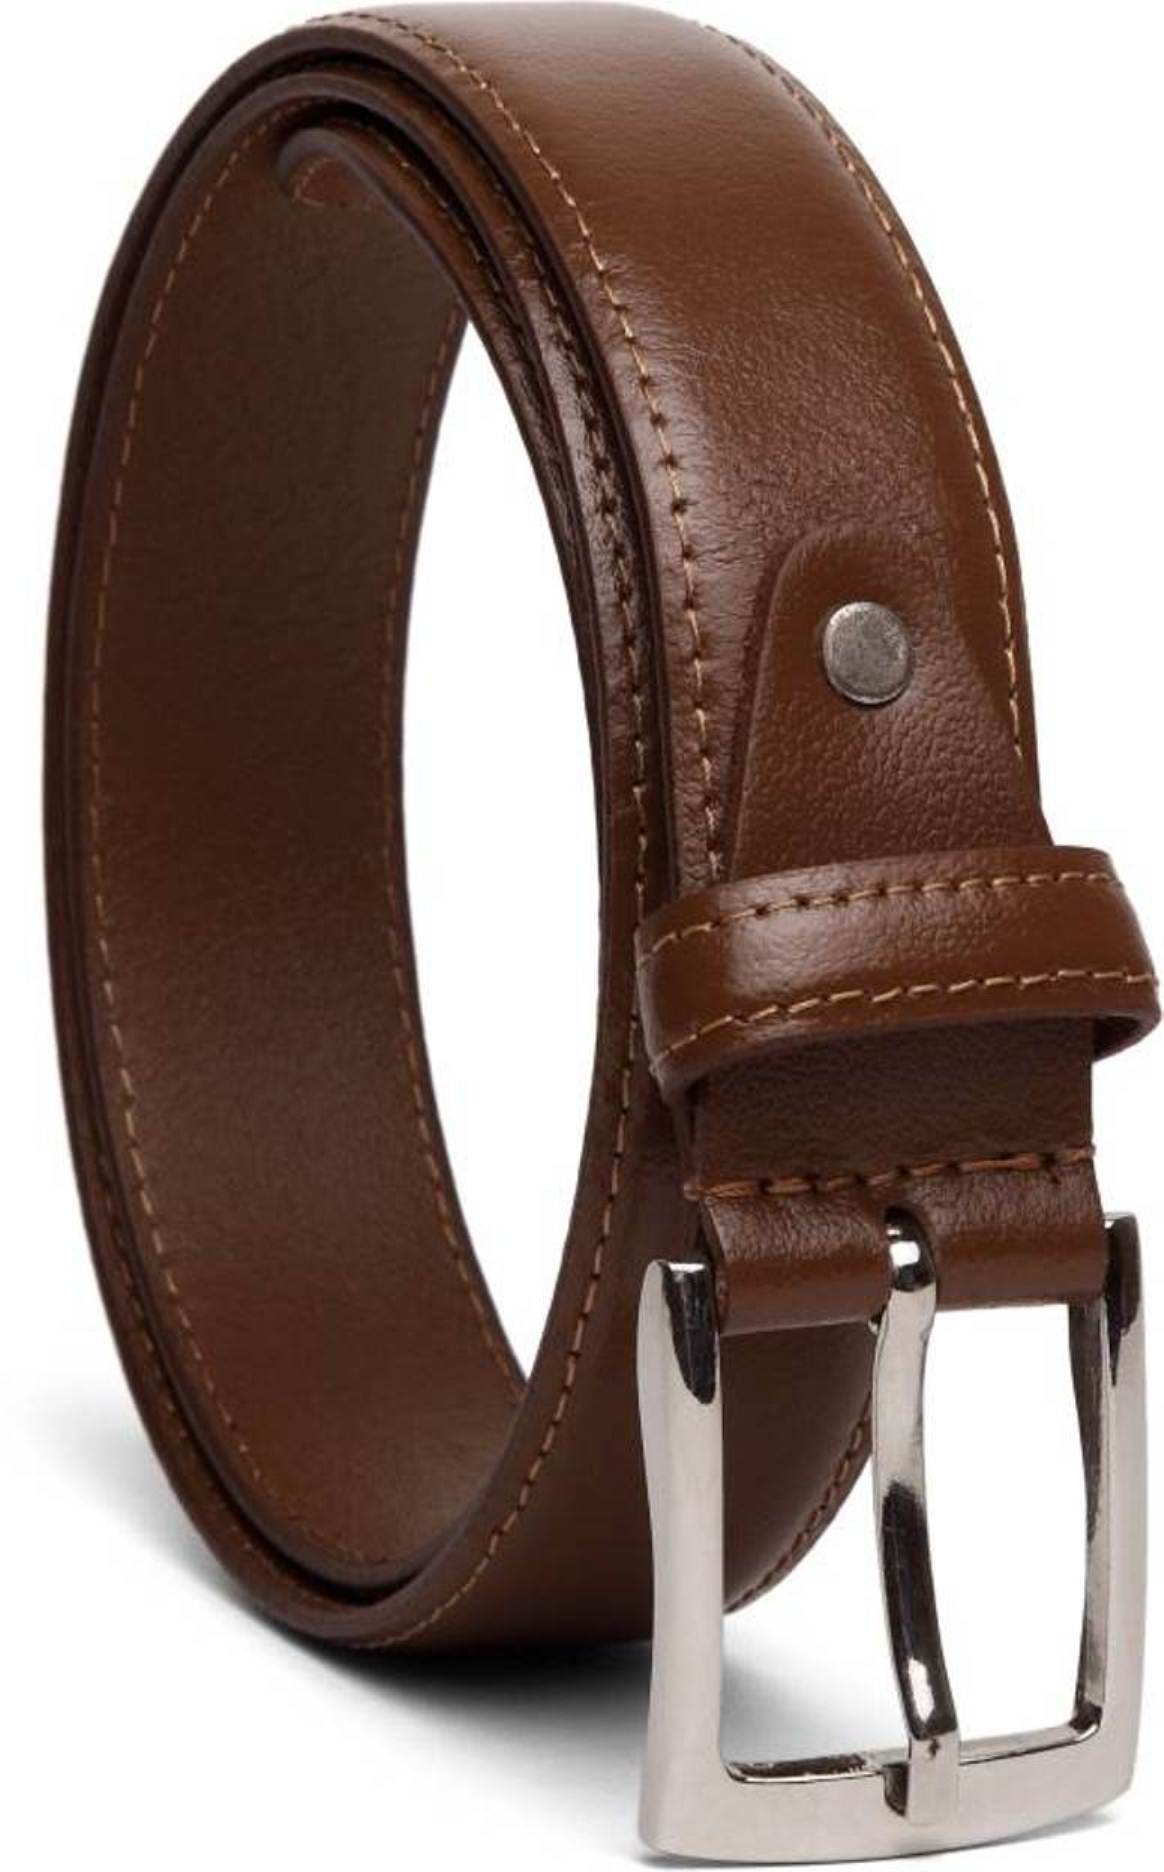 Buy Genuine Leather Casual and Formal Belts For Men and Boys leather ...